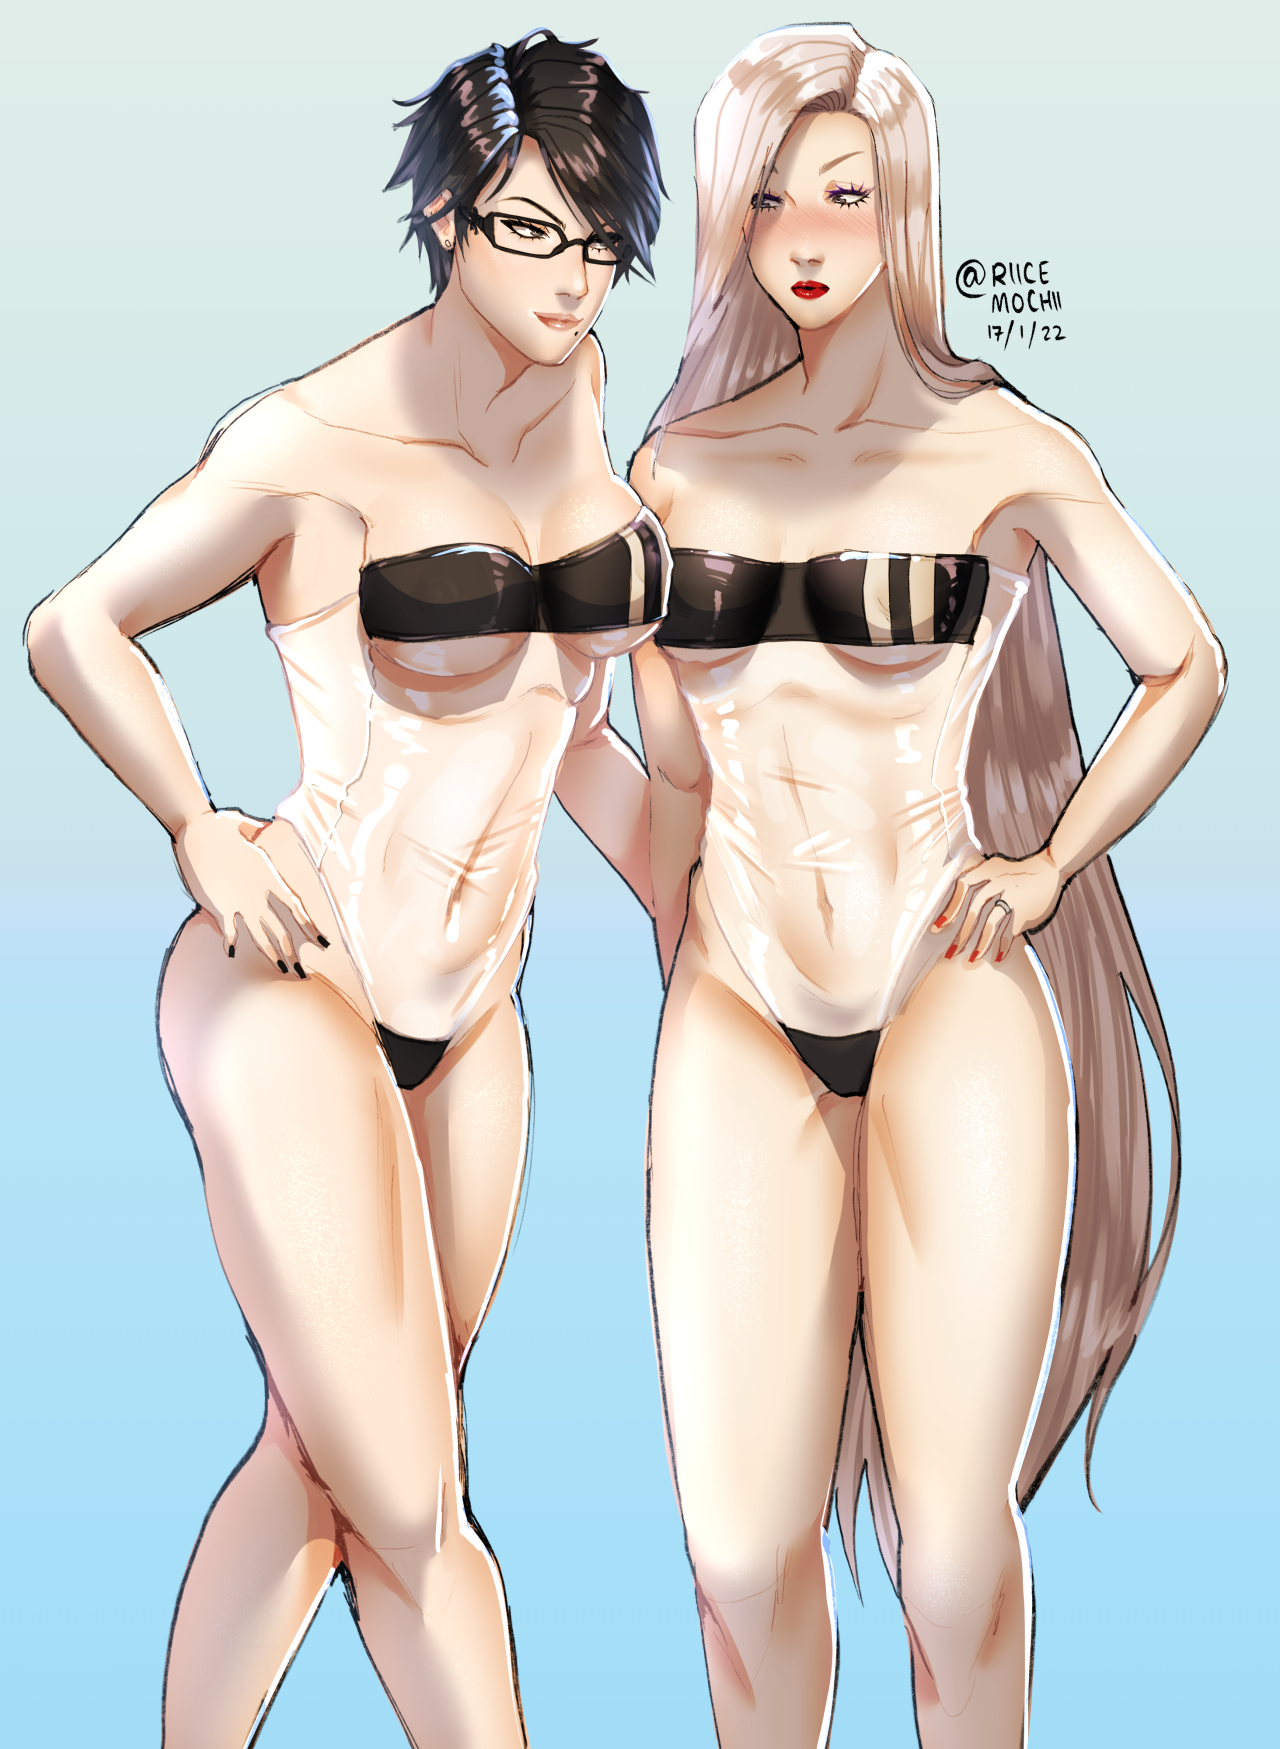 rendering the plastic was legit so fun i loved it but like yeah. the wives r matching. whats up. this is for that #GrisSwimsuit trend on twitter 🤪🤪🤪 #art#my art#fanart#bayonetta#bayonetta 2#bayonetta 3#bayojeanne #bayonetta x jeanne #grisswimsuit